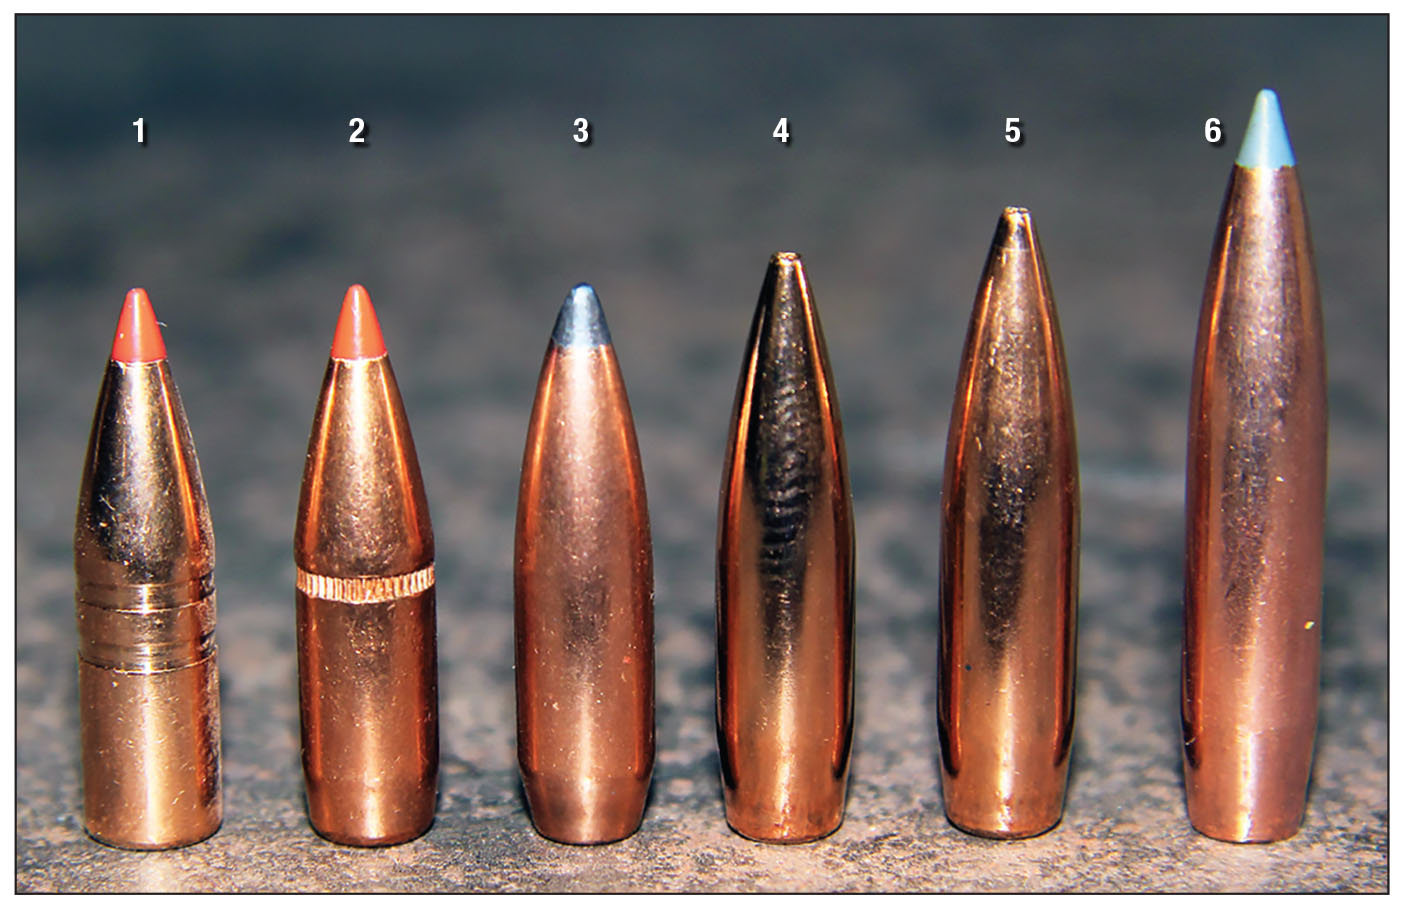 Bullets used for the accompanying handloads included: (1) Hornady’s 100-grain GMX and (2) 120-grain SST, (3) Sierra’s 130-grain GameKing SBT, (4) Berger’s 130-grain and (5) 140-grain VLD Hunting and (6) Nosler’s 165-grain AccuBond Long Range.